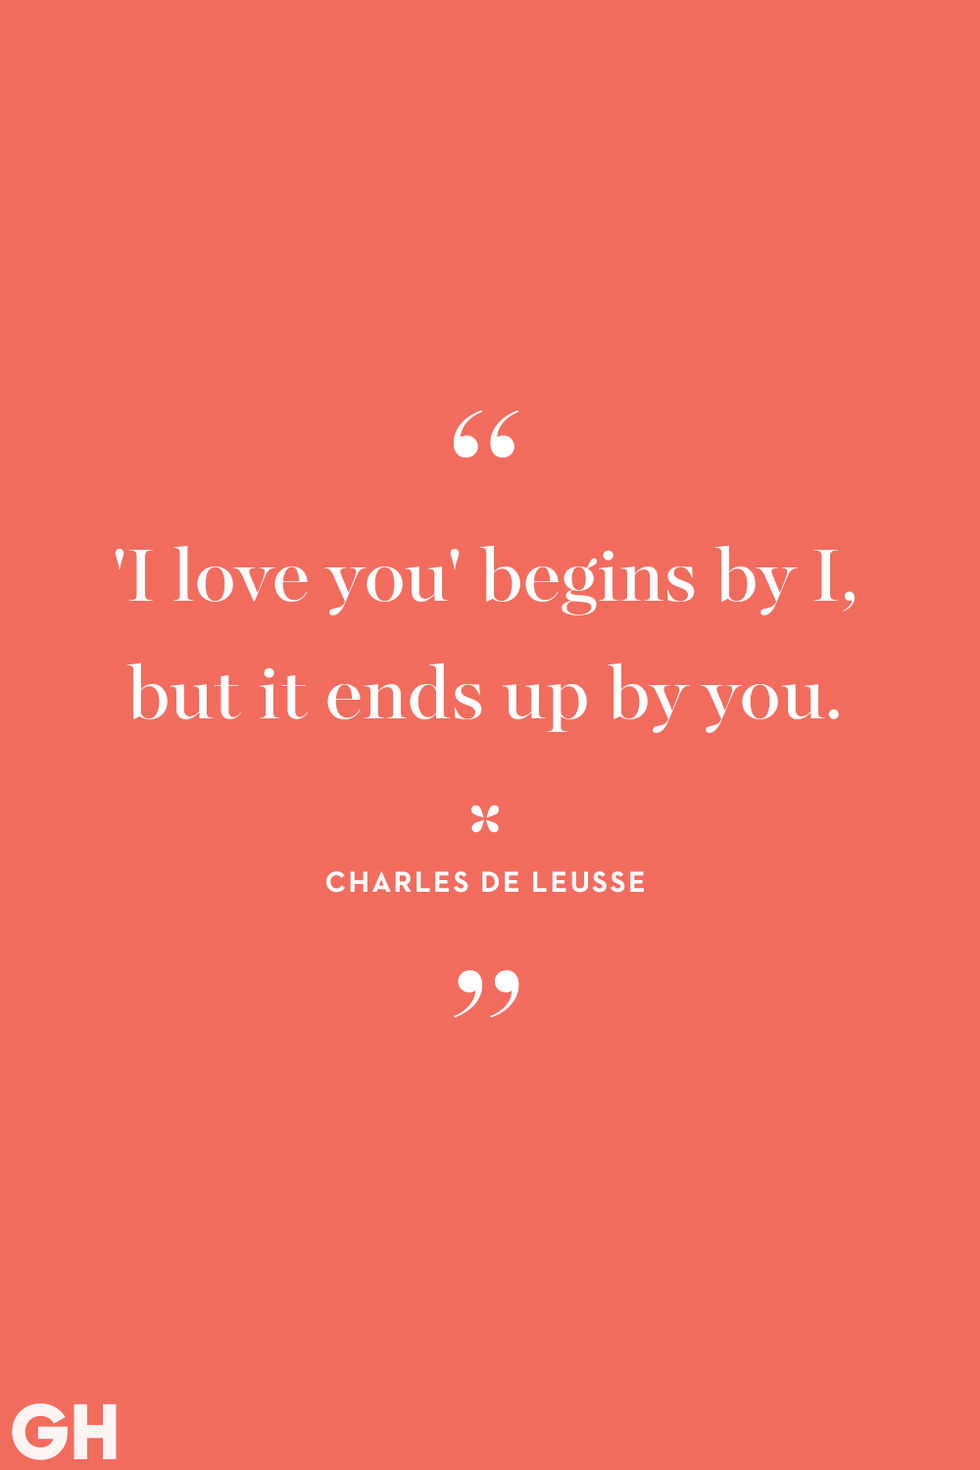 90 Best Romantic Love Quotes for Her